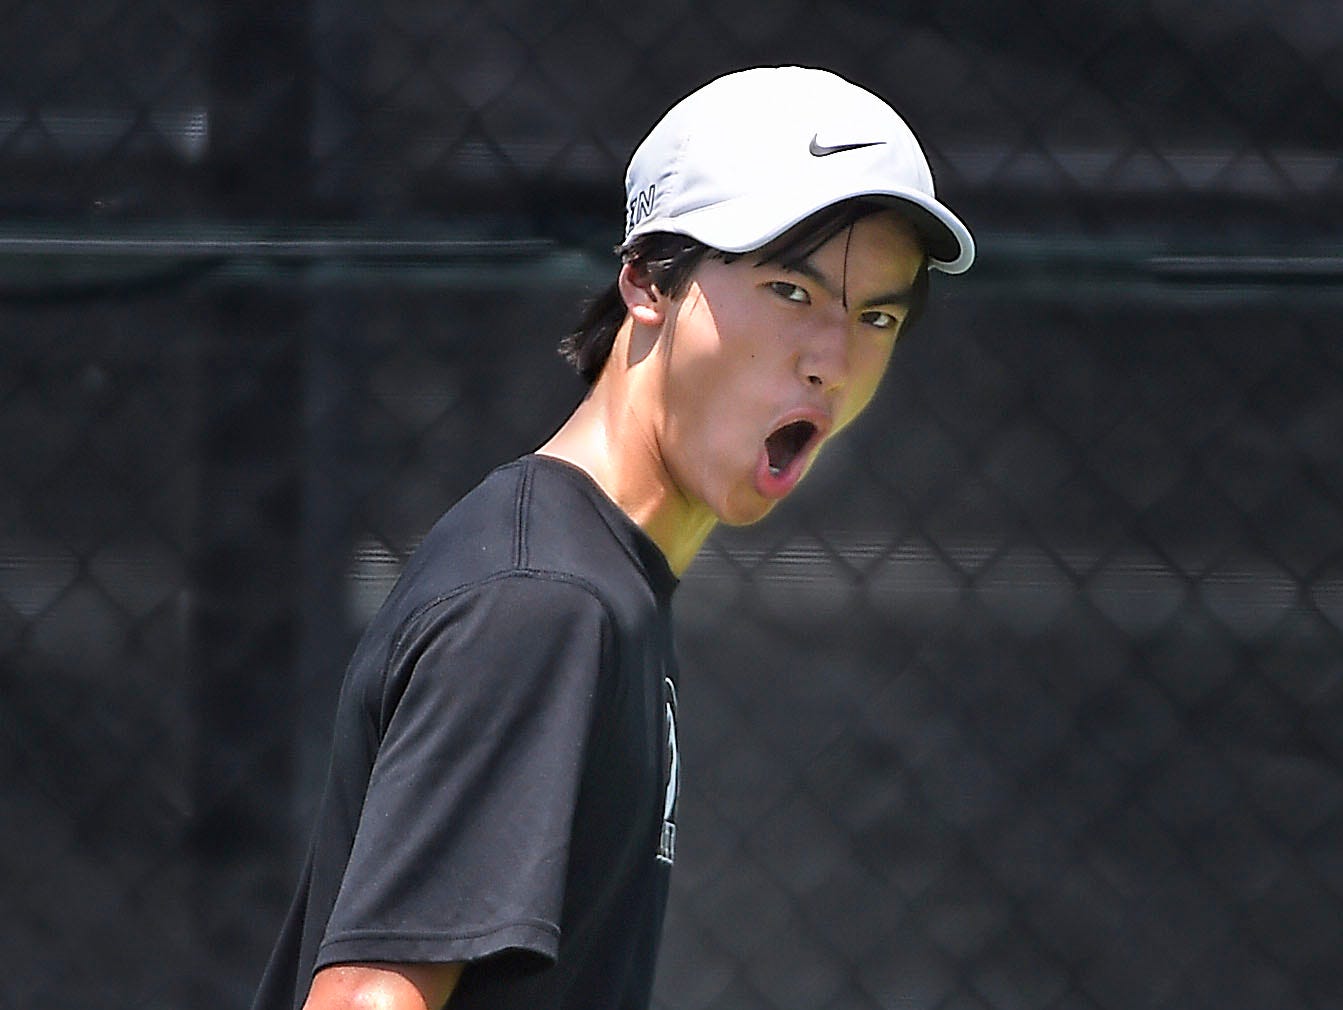 Central Magnet's Nathan Zou shouts as he scores against MTCS's Will Reeves in the 2016 TSSAA State tennis tournament Thursday May 26, 2016, in Murfreesboro, TN